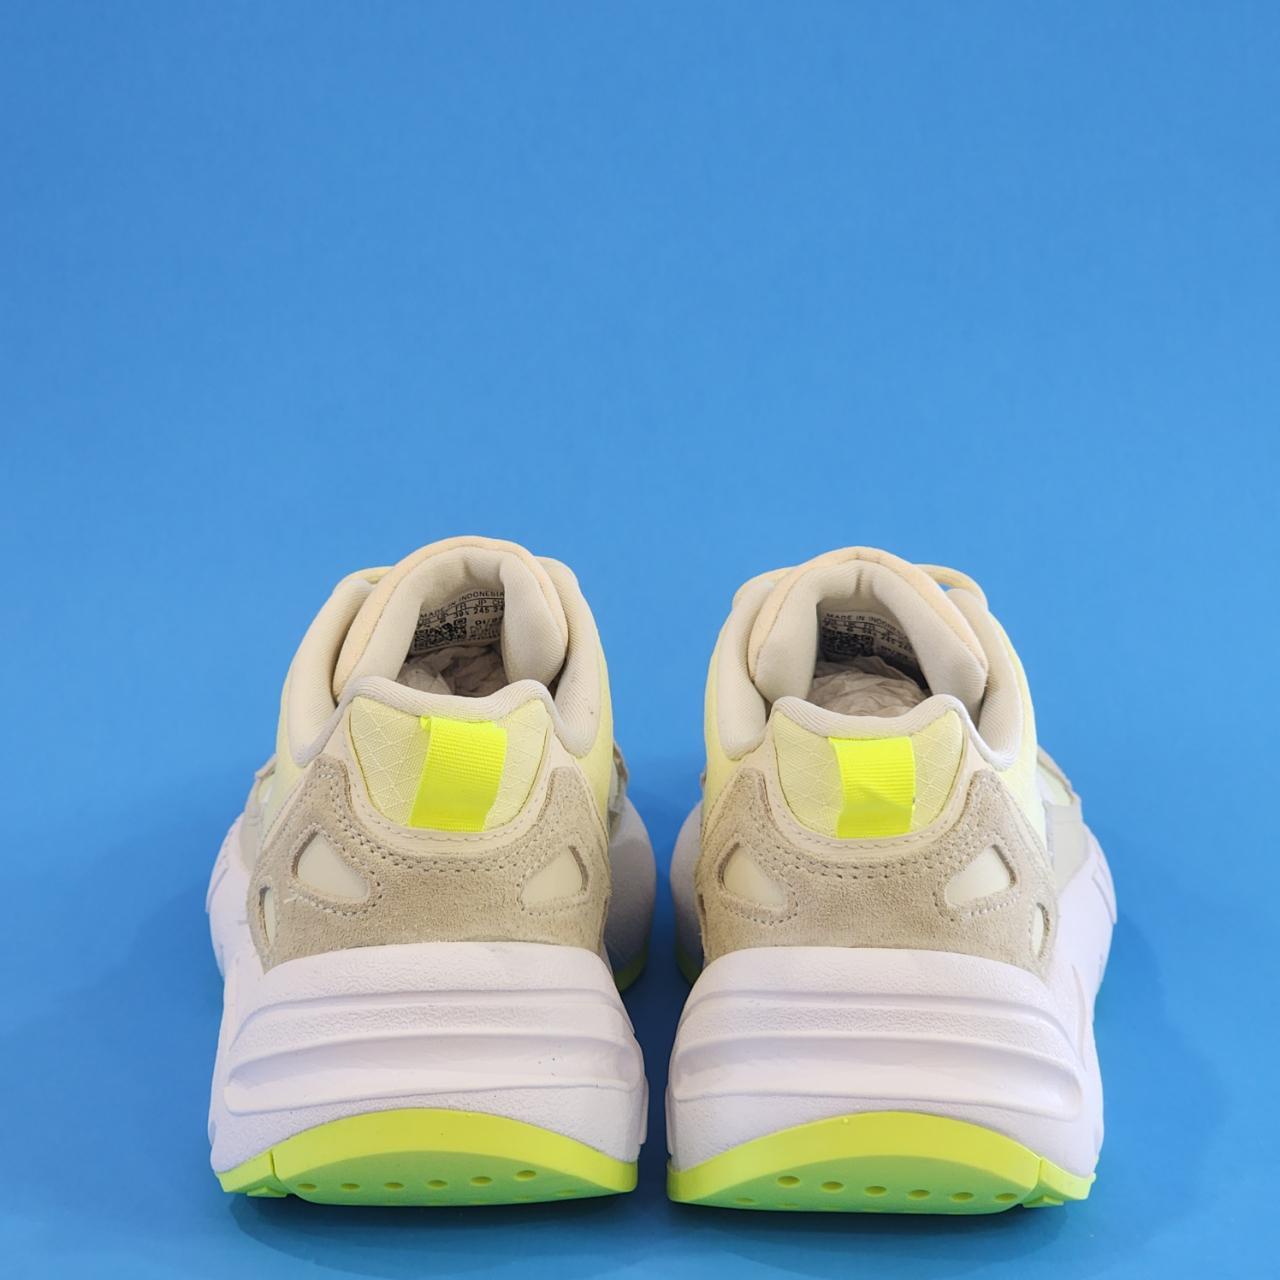 Adidas ZX 22 BOOST Sand / Cloud White / Yellow Tint